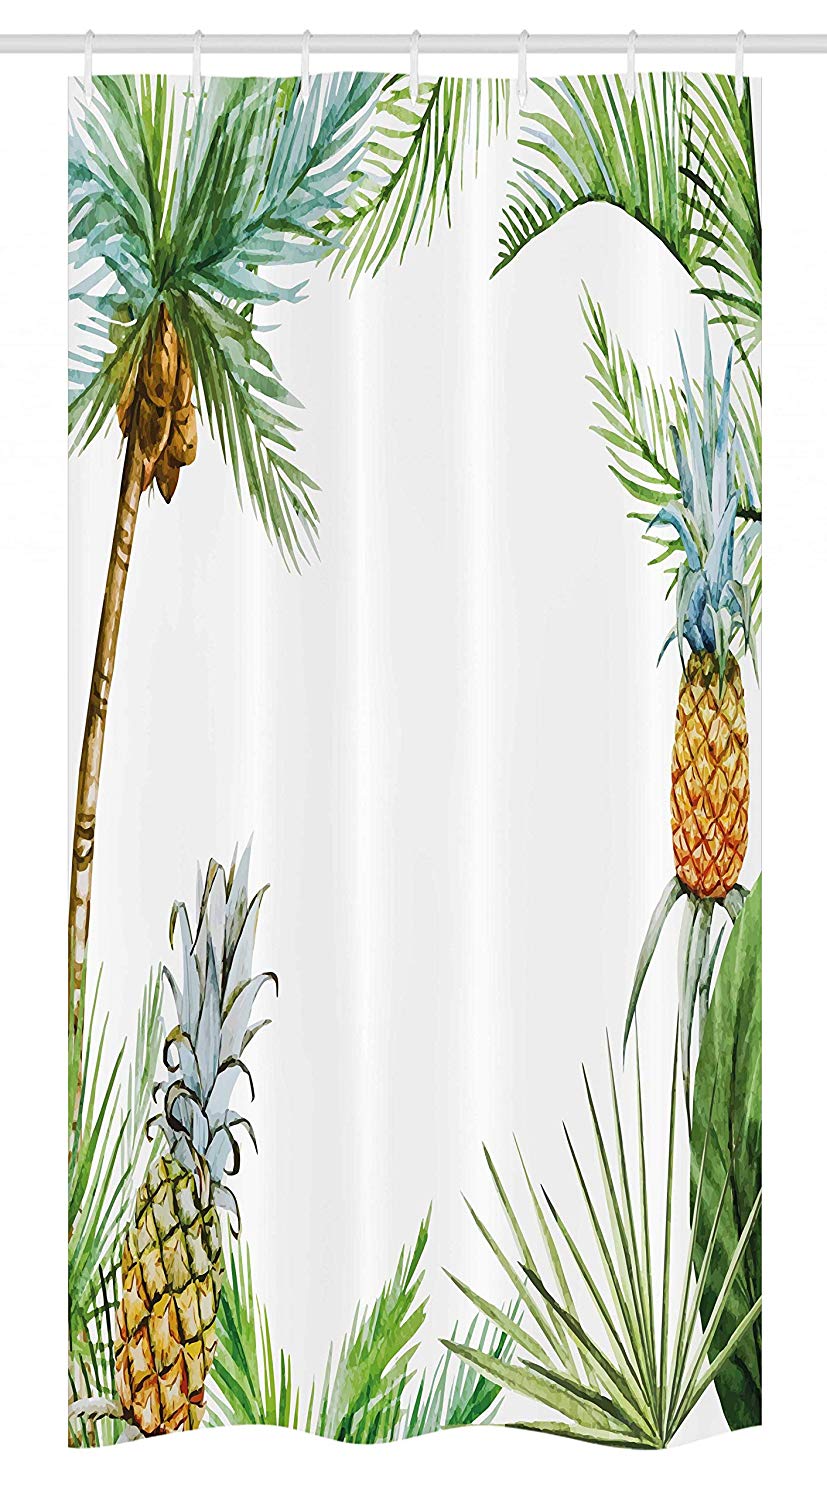 Ambesonne Pineapple Stall Shower Curtain, Watercolor Tropical Island Style Border Print Exotic Fruit Palm Trees and Leaves, Fabric Bathroom Decor Set with Hooks, 36